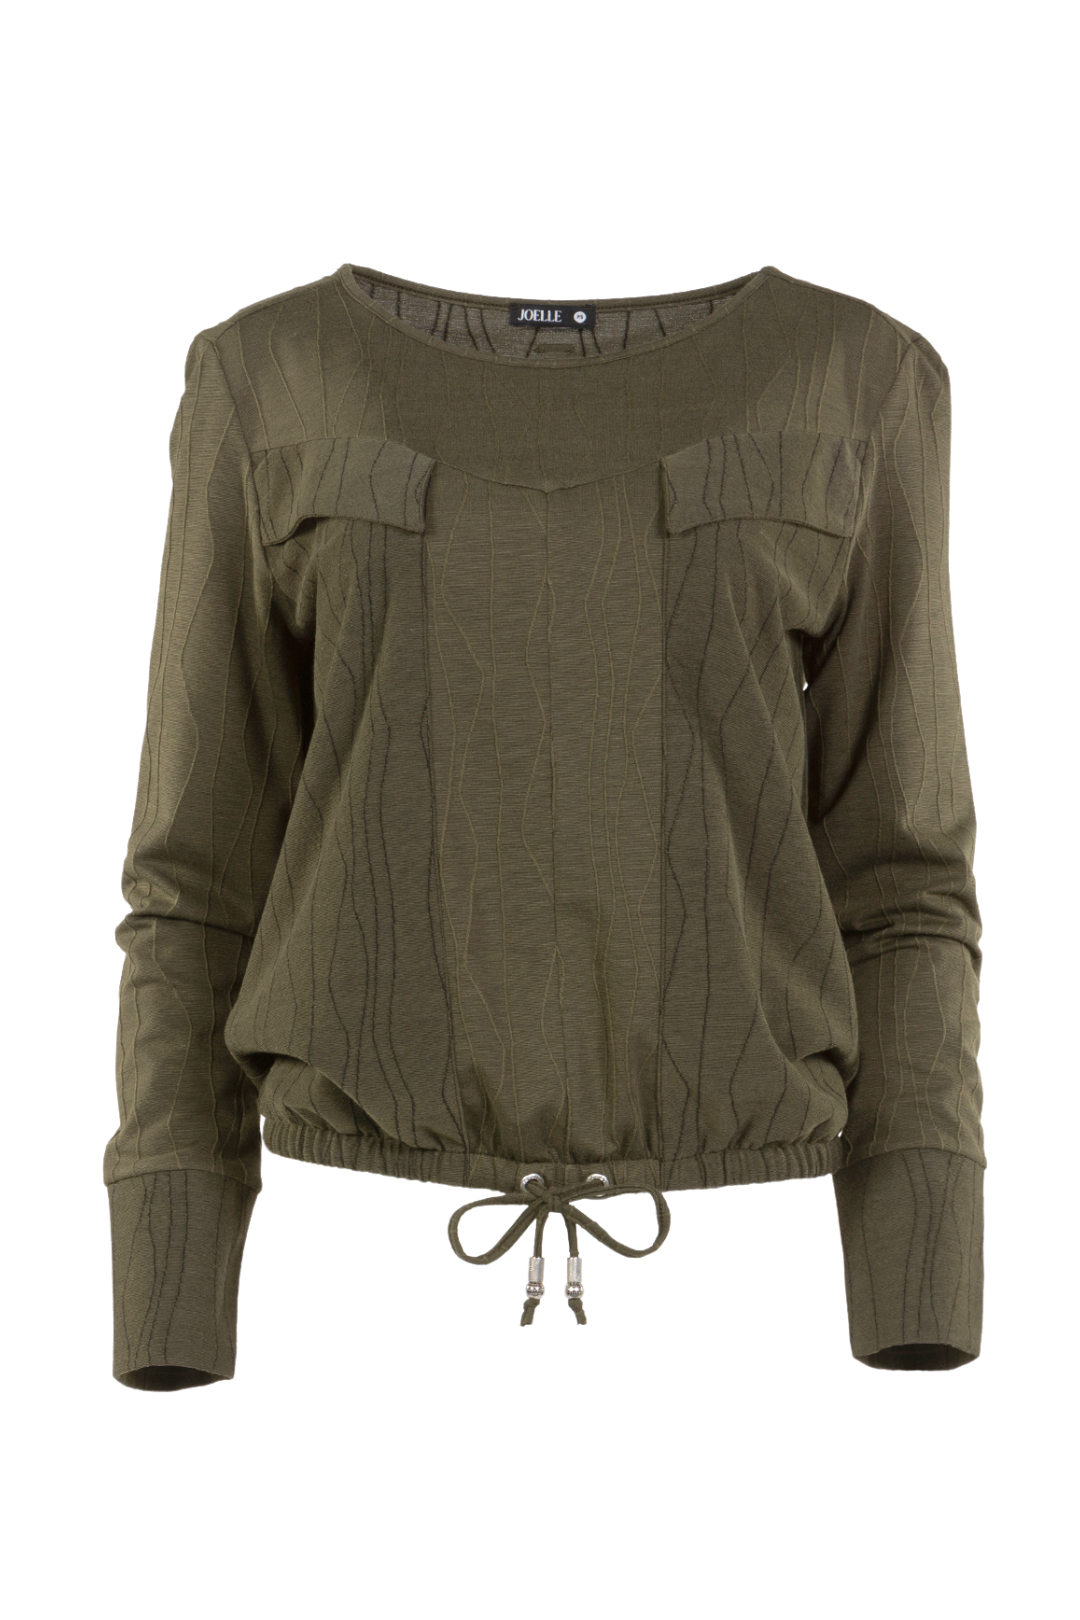 Green-brown sweater adjustable at the waist | Mulberry